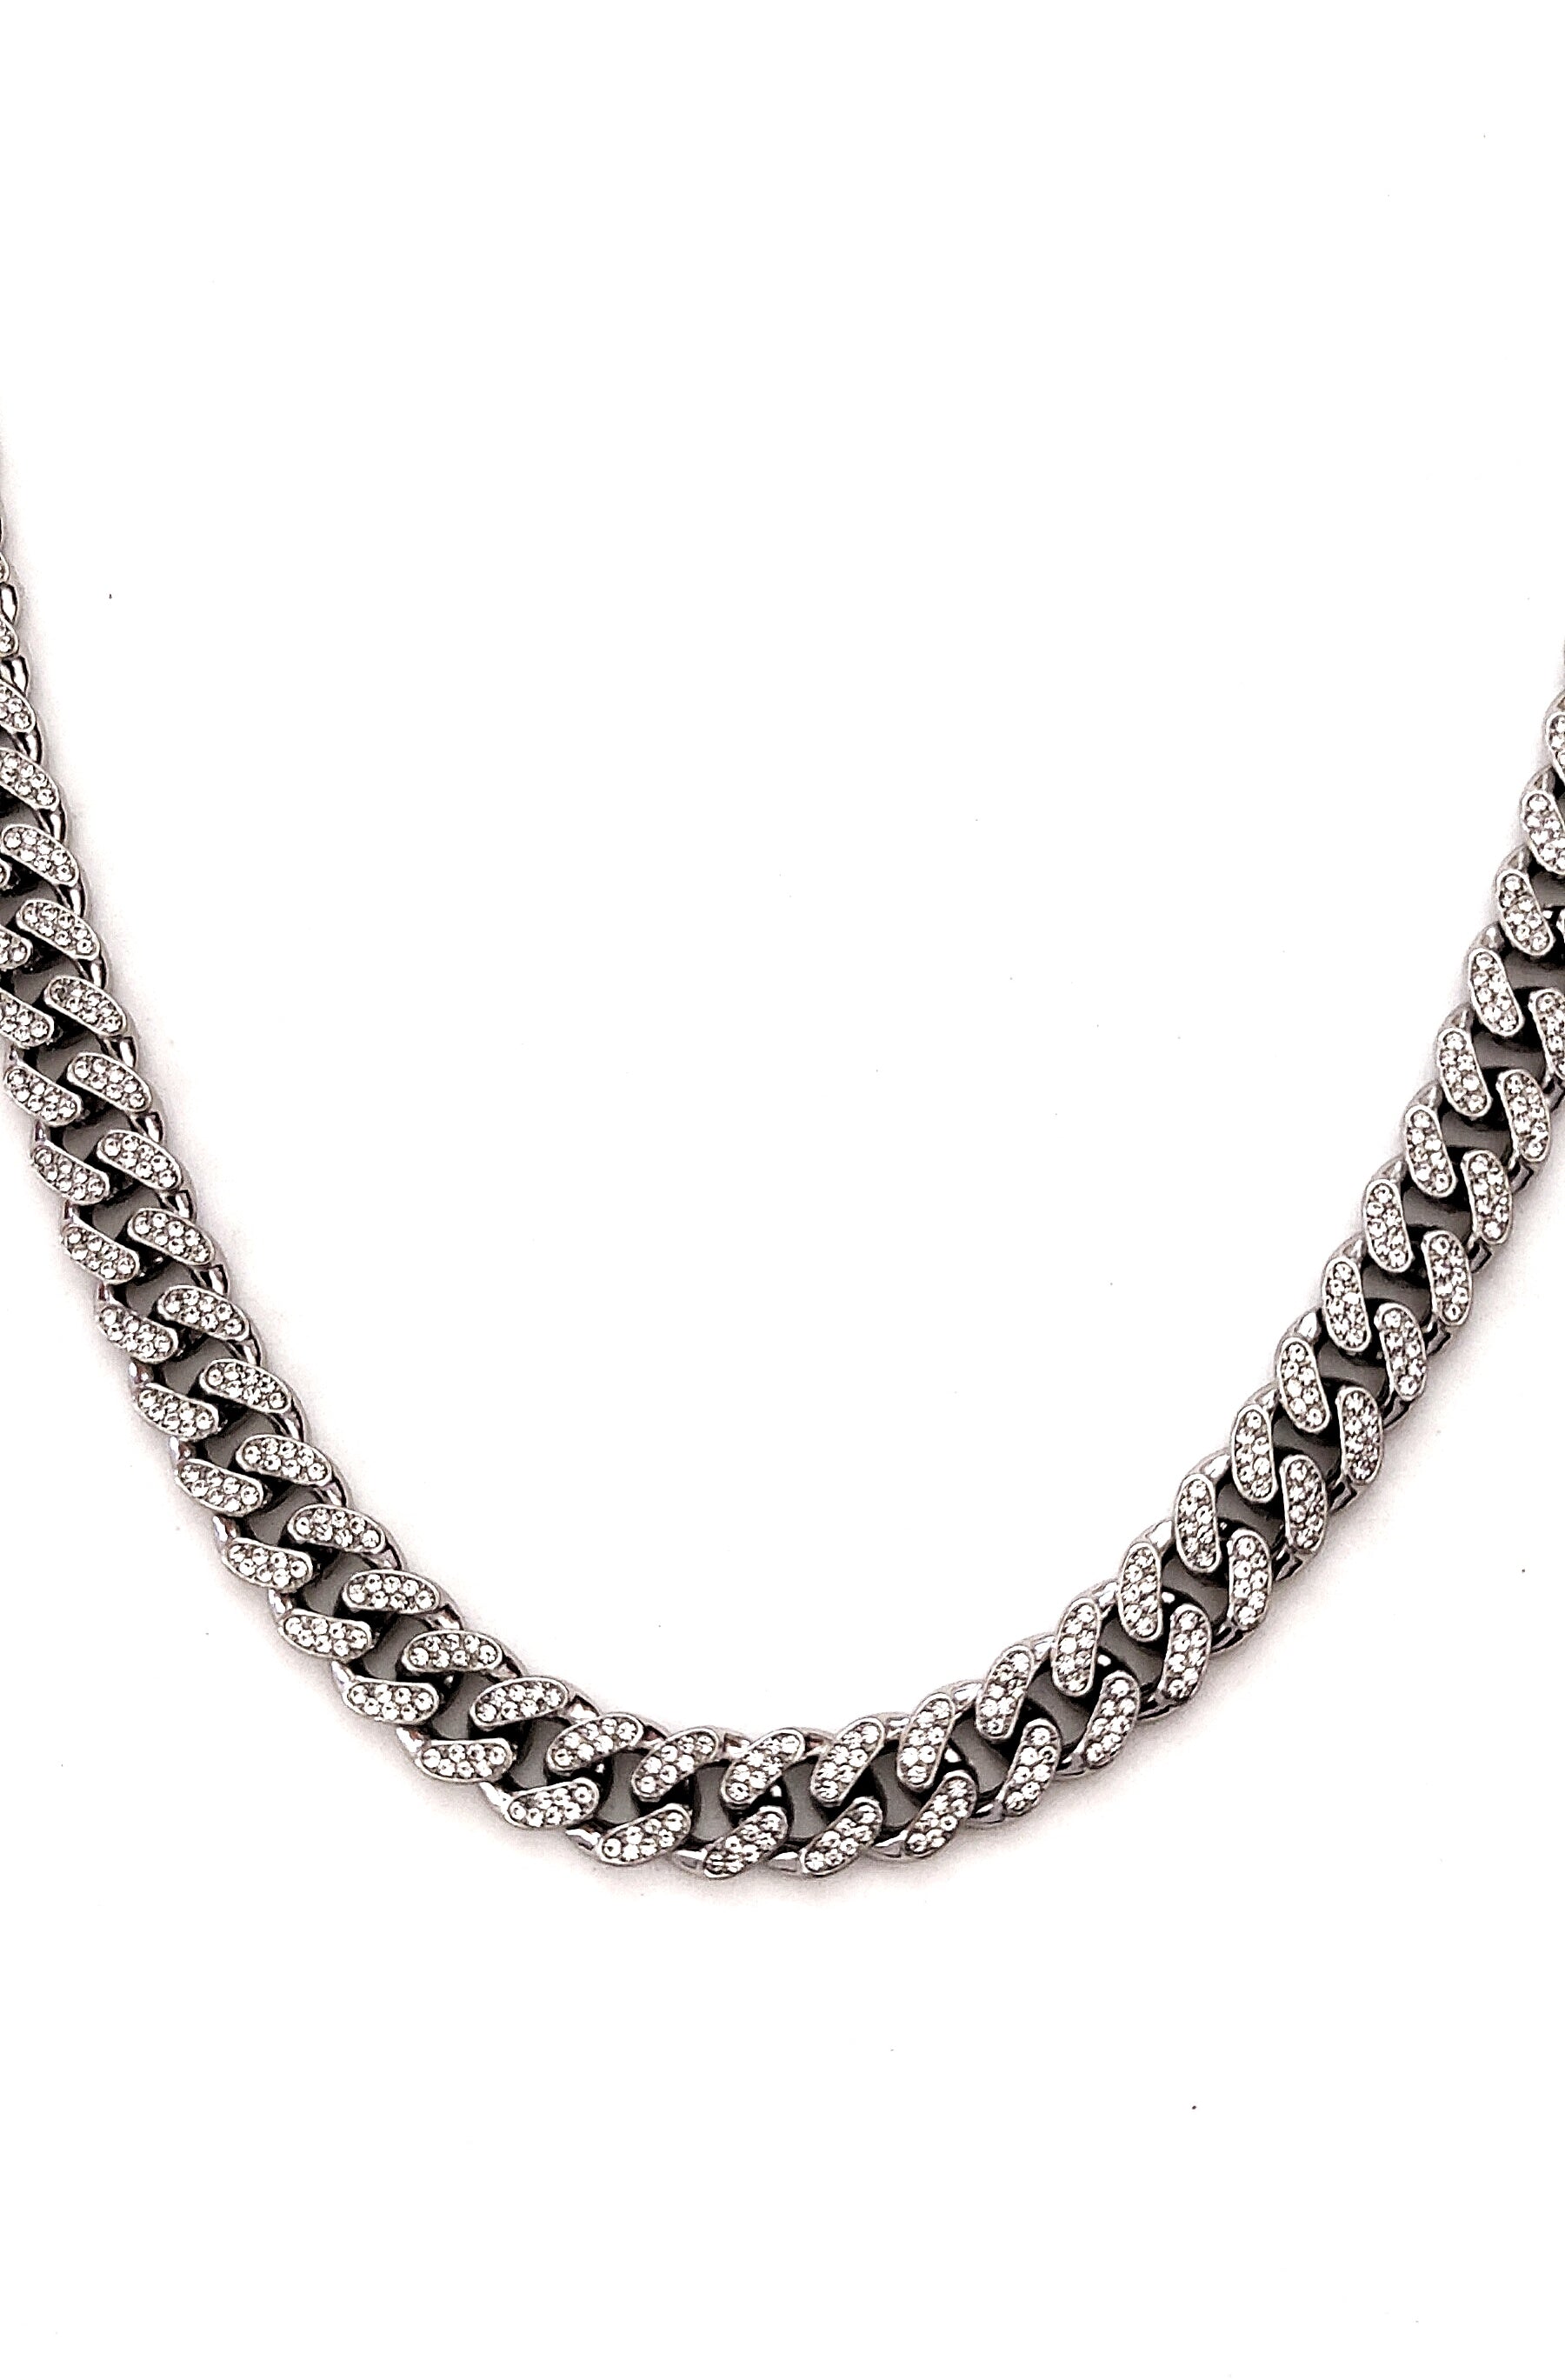 Artic Ice 12mm Miami Freezing Cuban Link necklace by Freshice